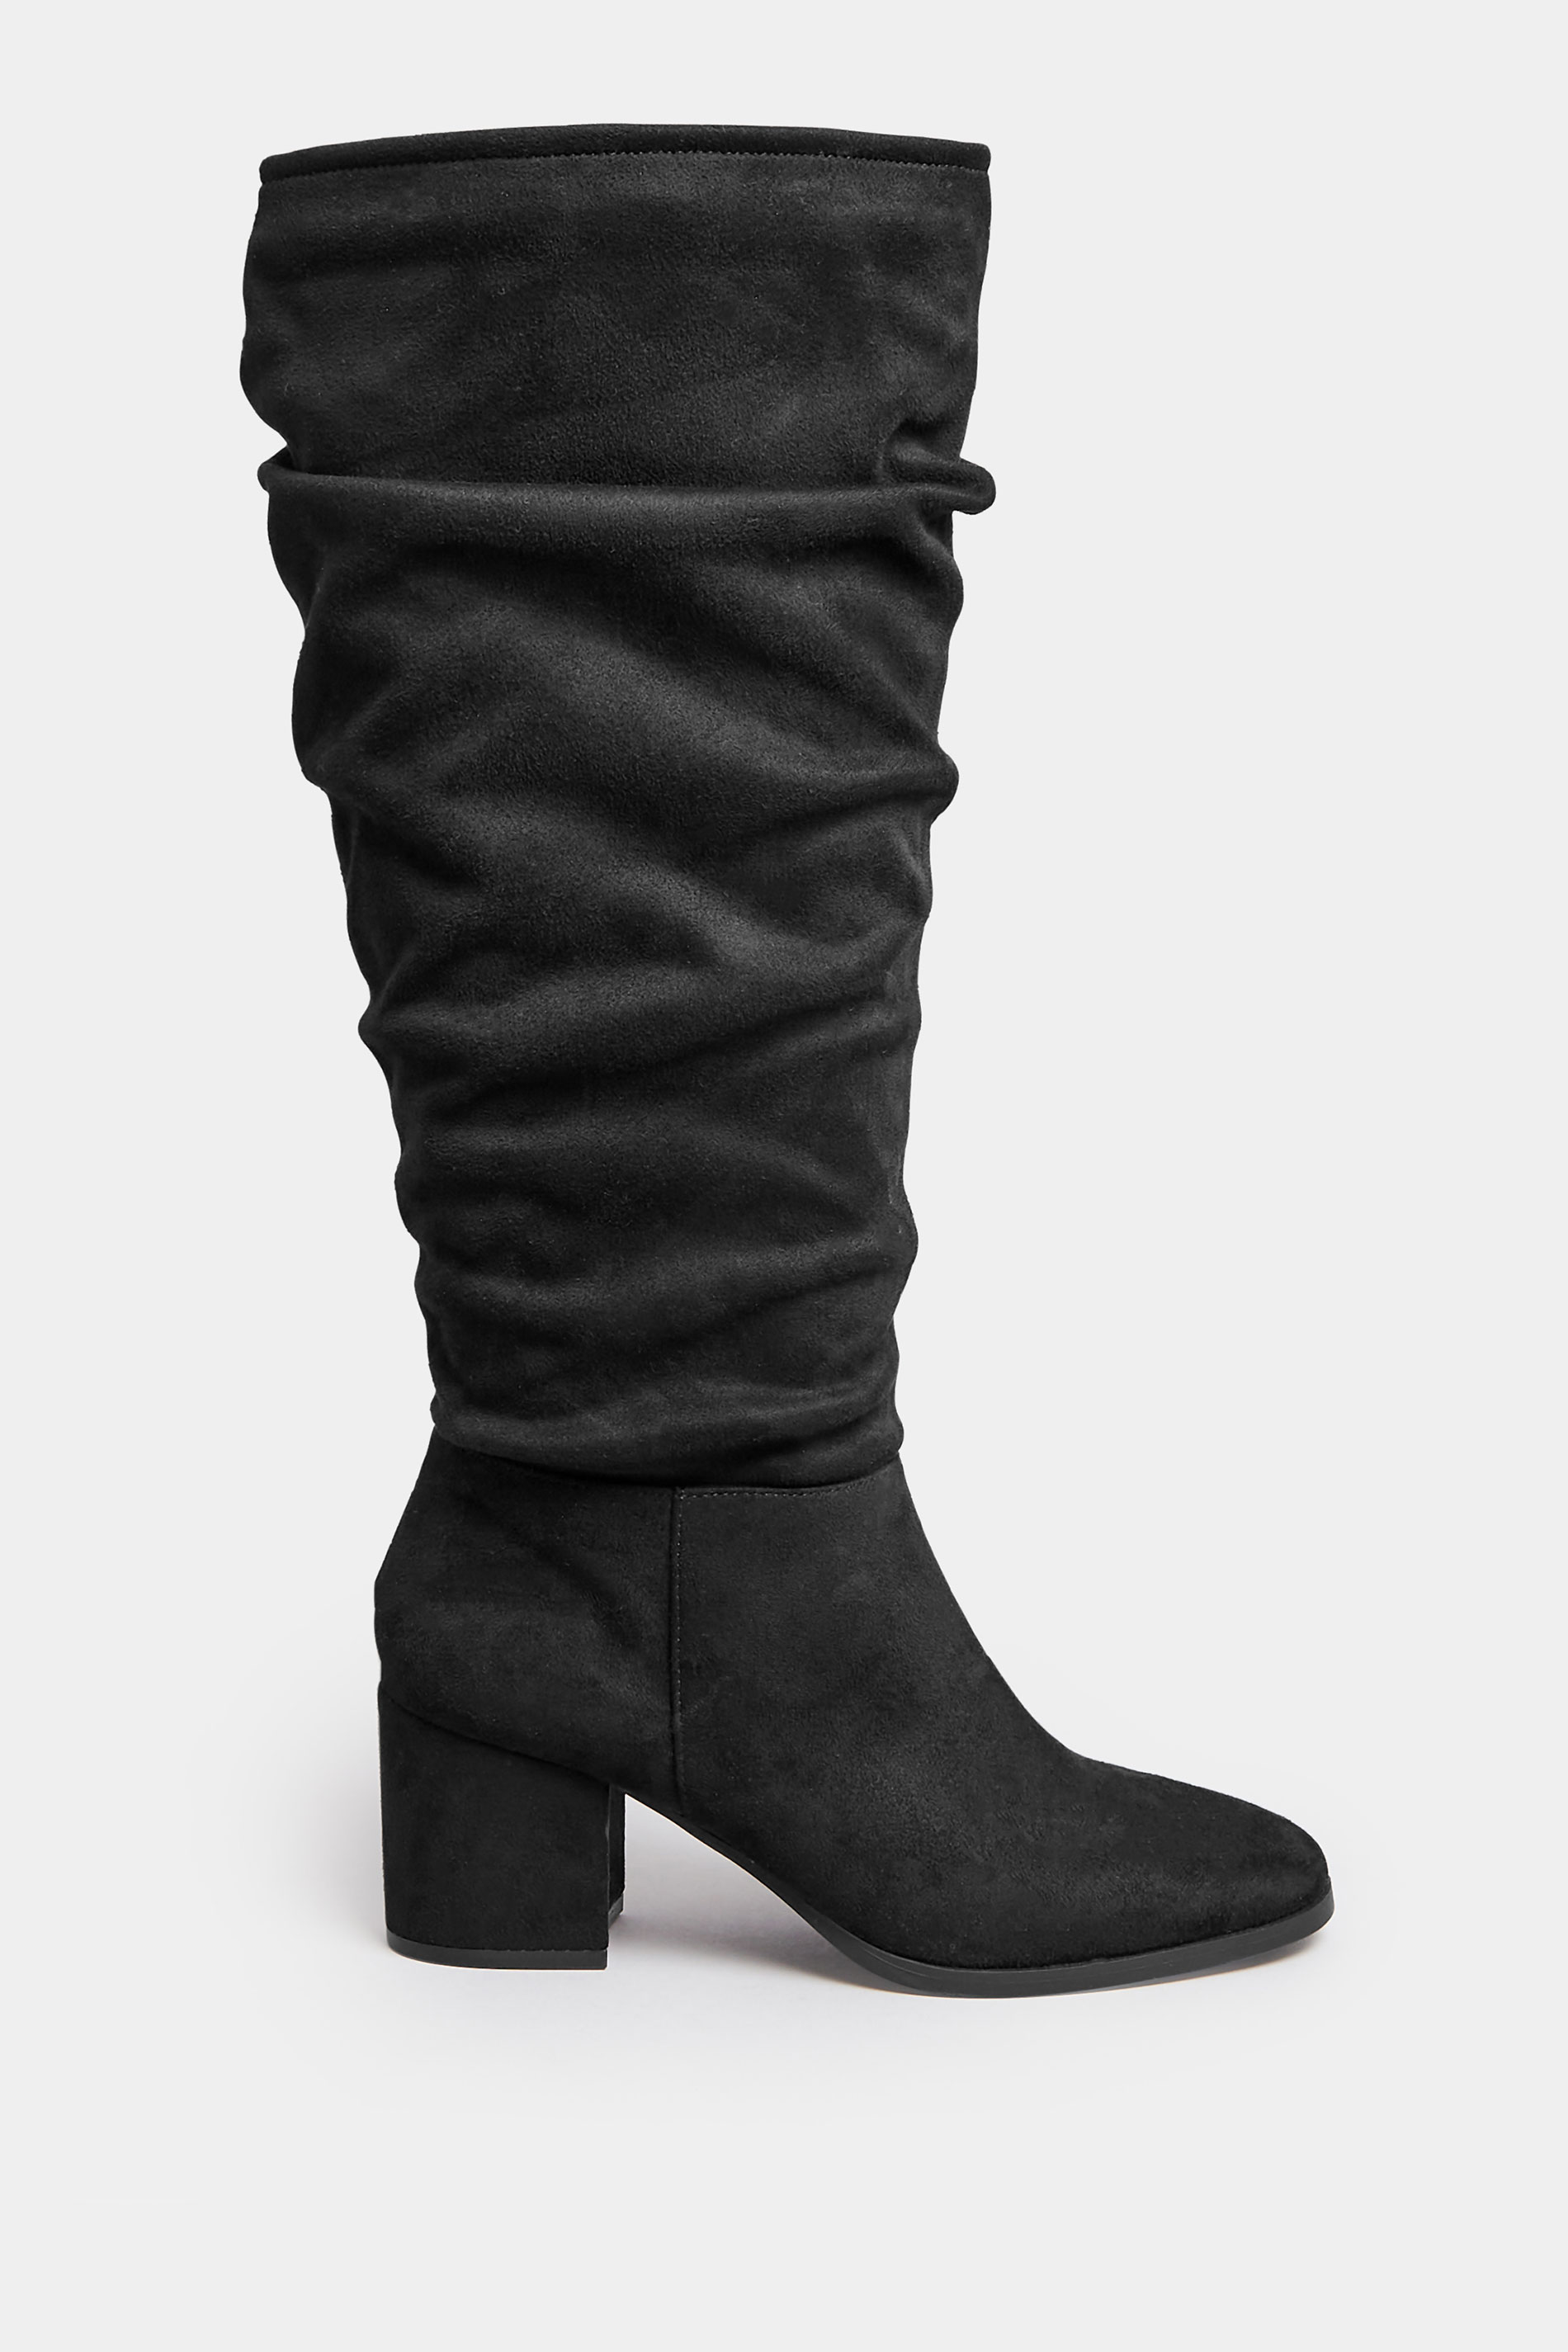 LIMITED COLLECTION Curve Black Slouch Knee High Boots In Extra Wide EEE Fit | Yours Clothing  3